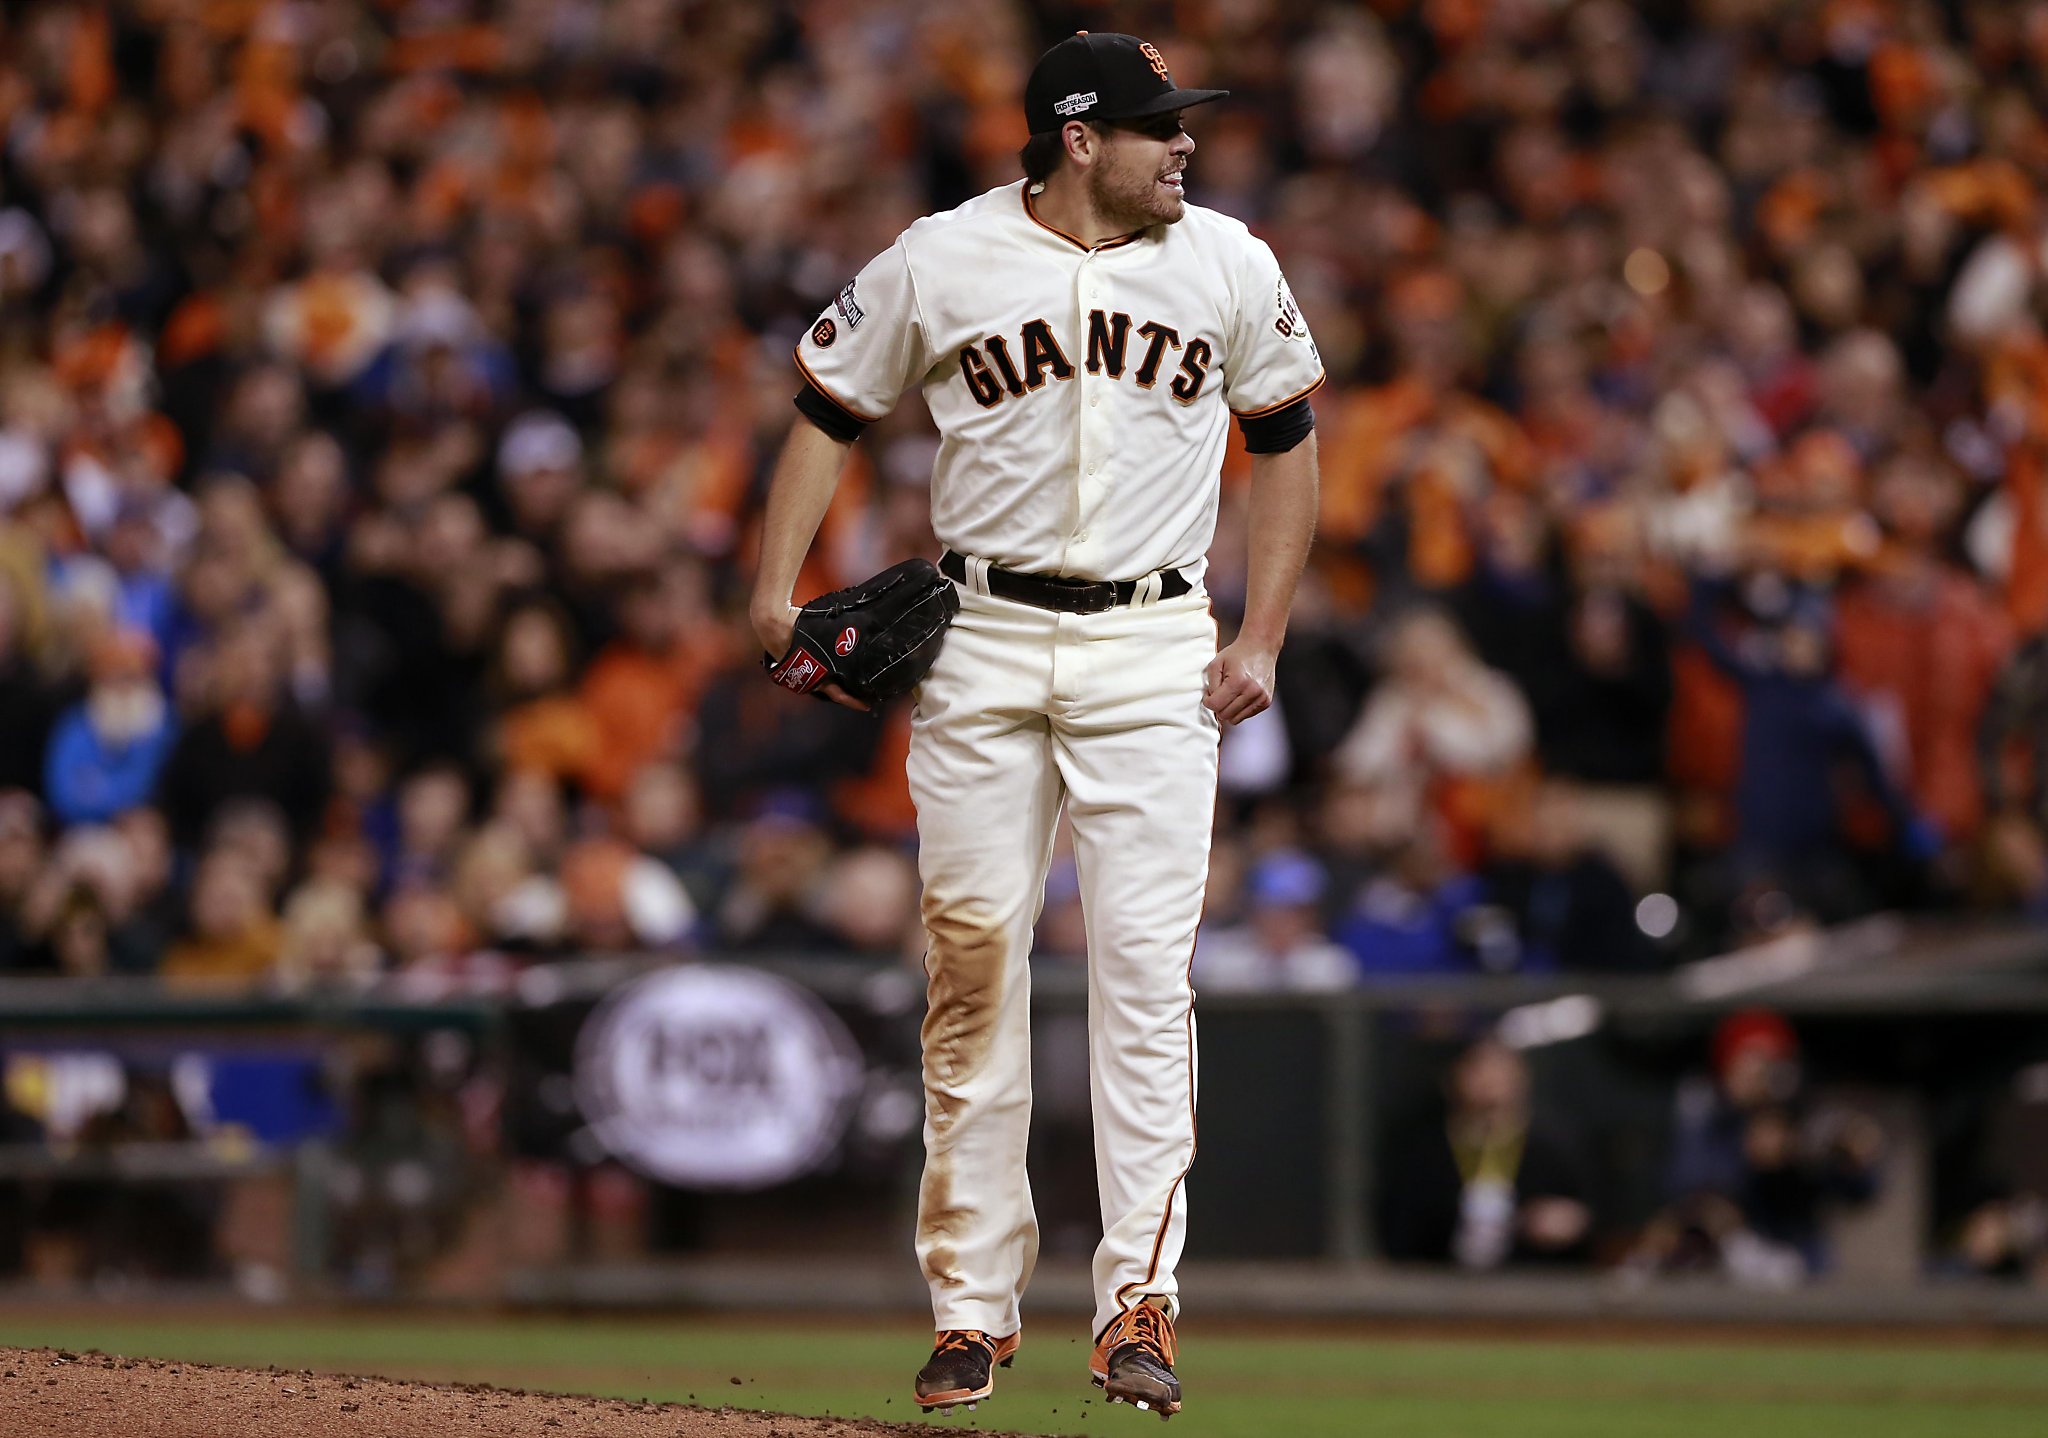 SF Giants have let unvaccinated coach work remotely all year